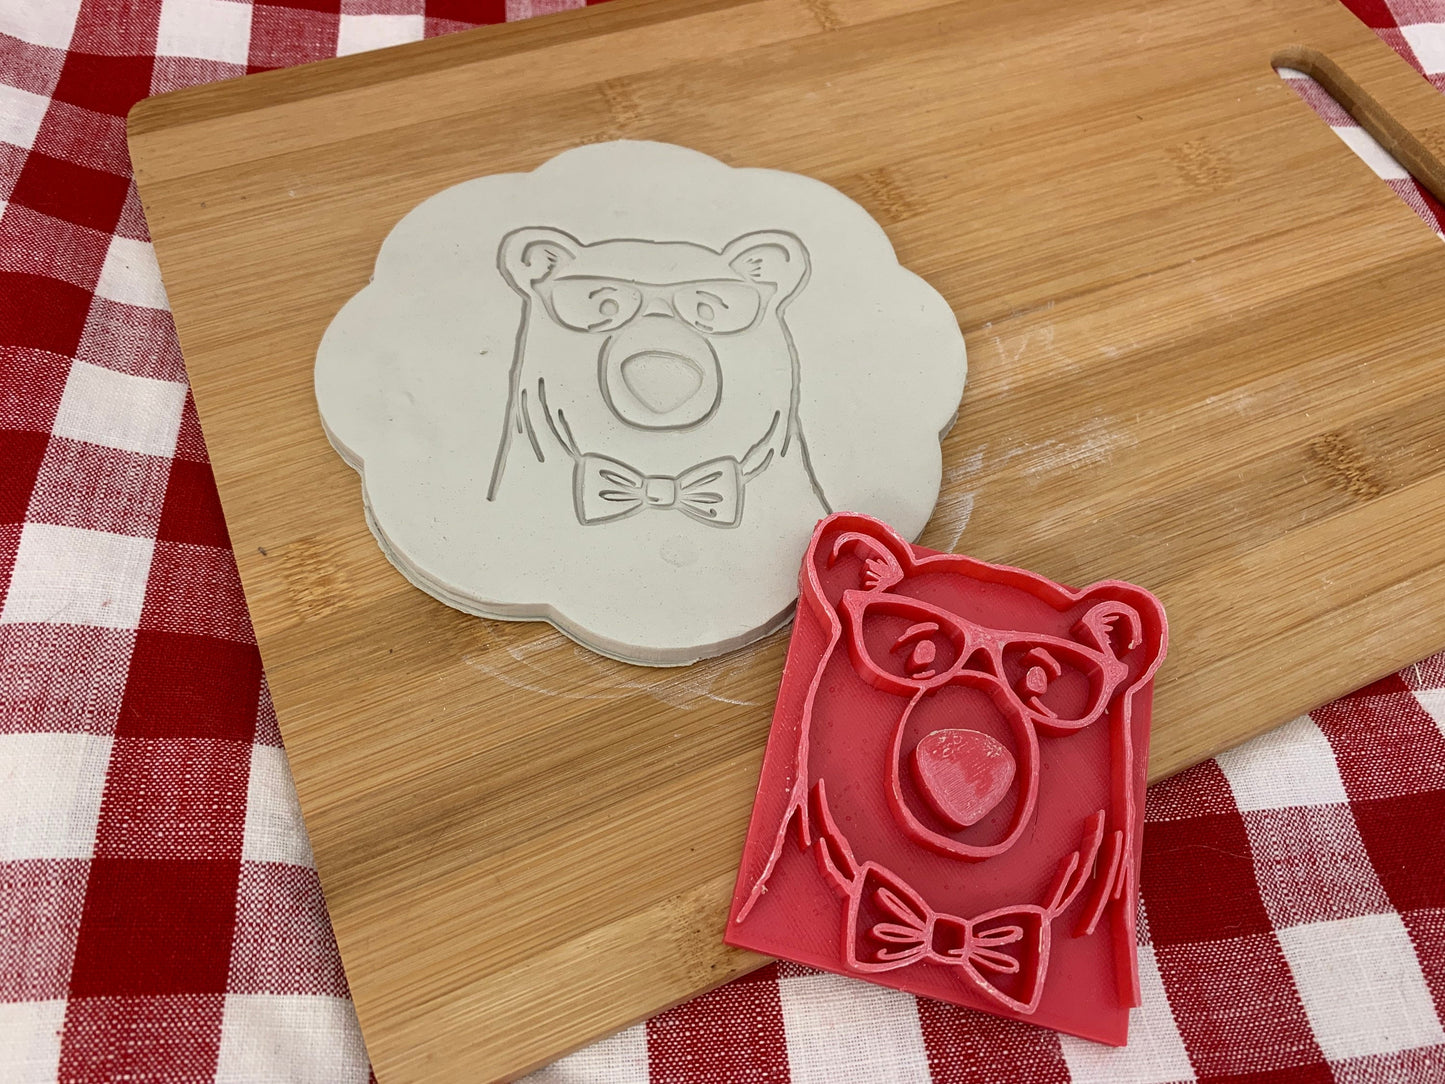 Bear Face w/ glasses or floral wreath pottery stamp - plastic 3d printed, multiple sizes